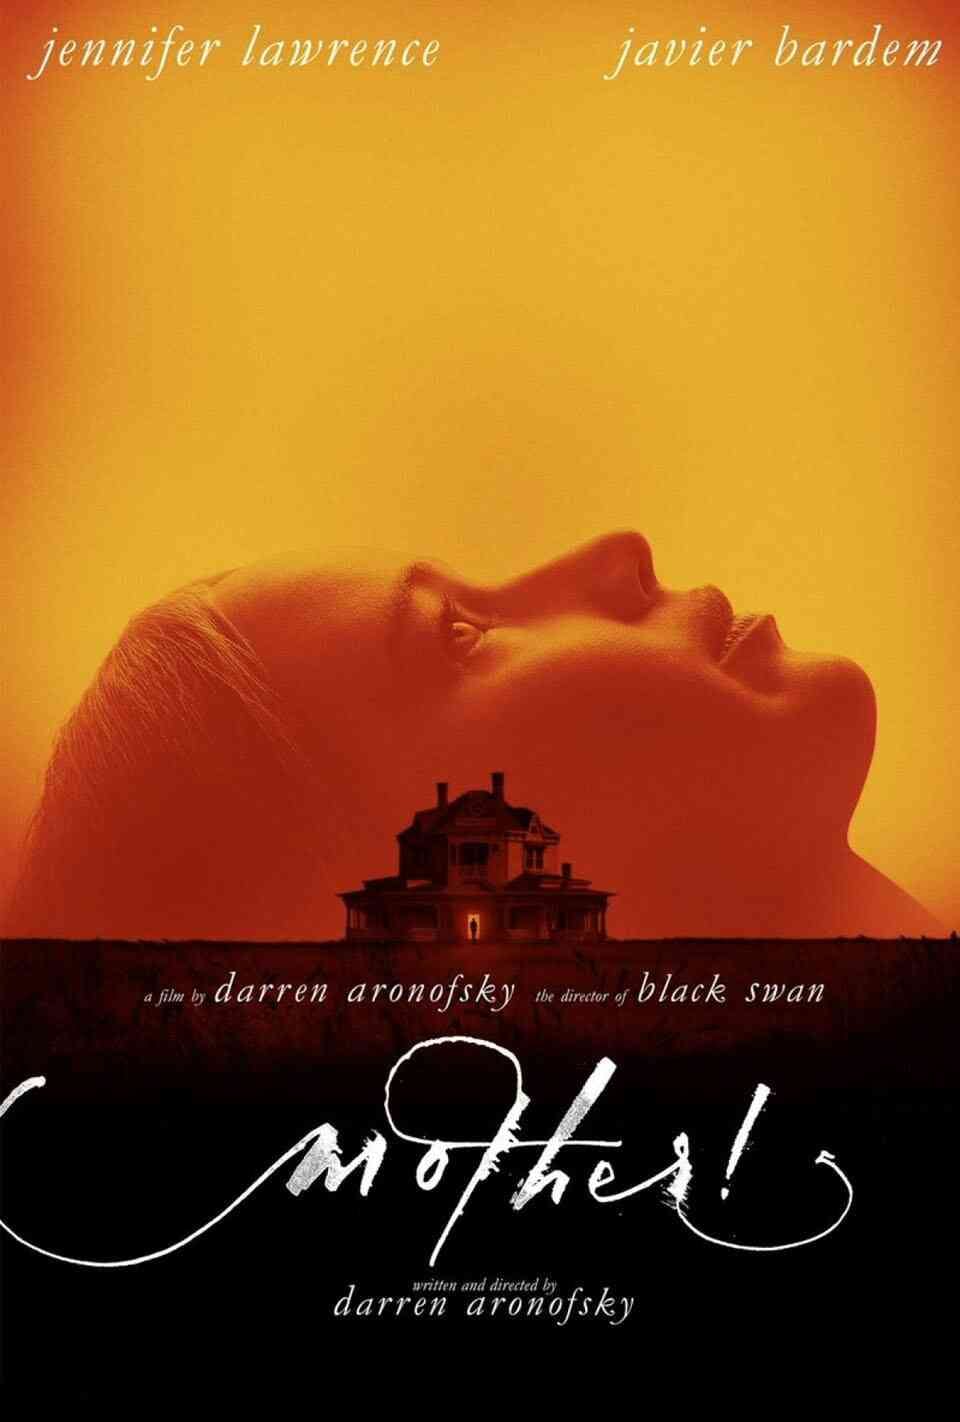 Read mother! screenplay (poster)